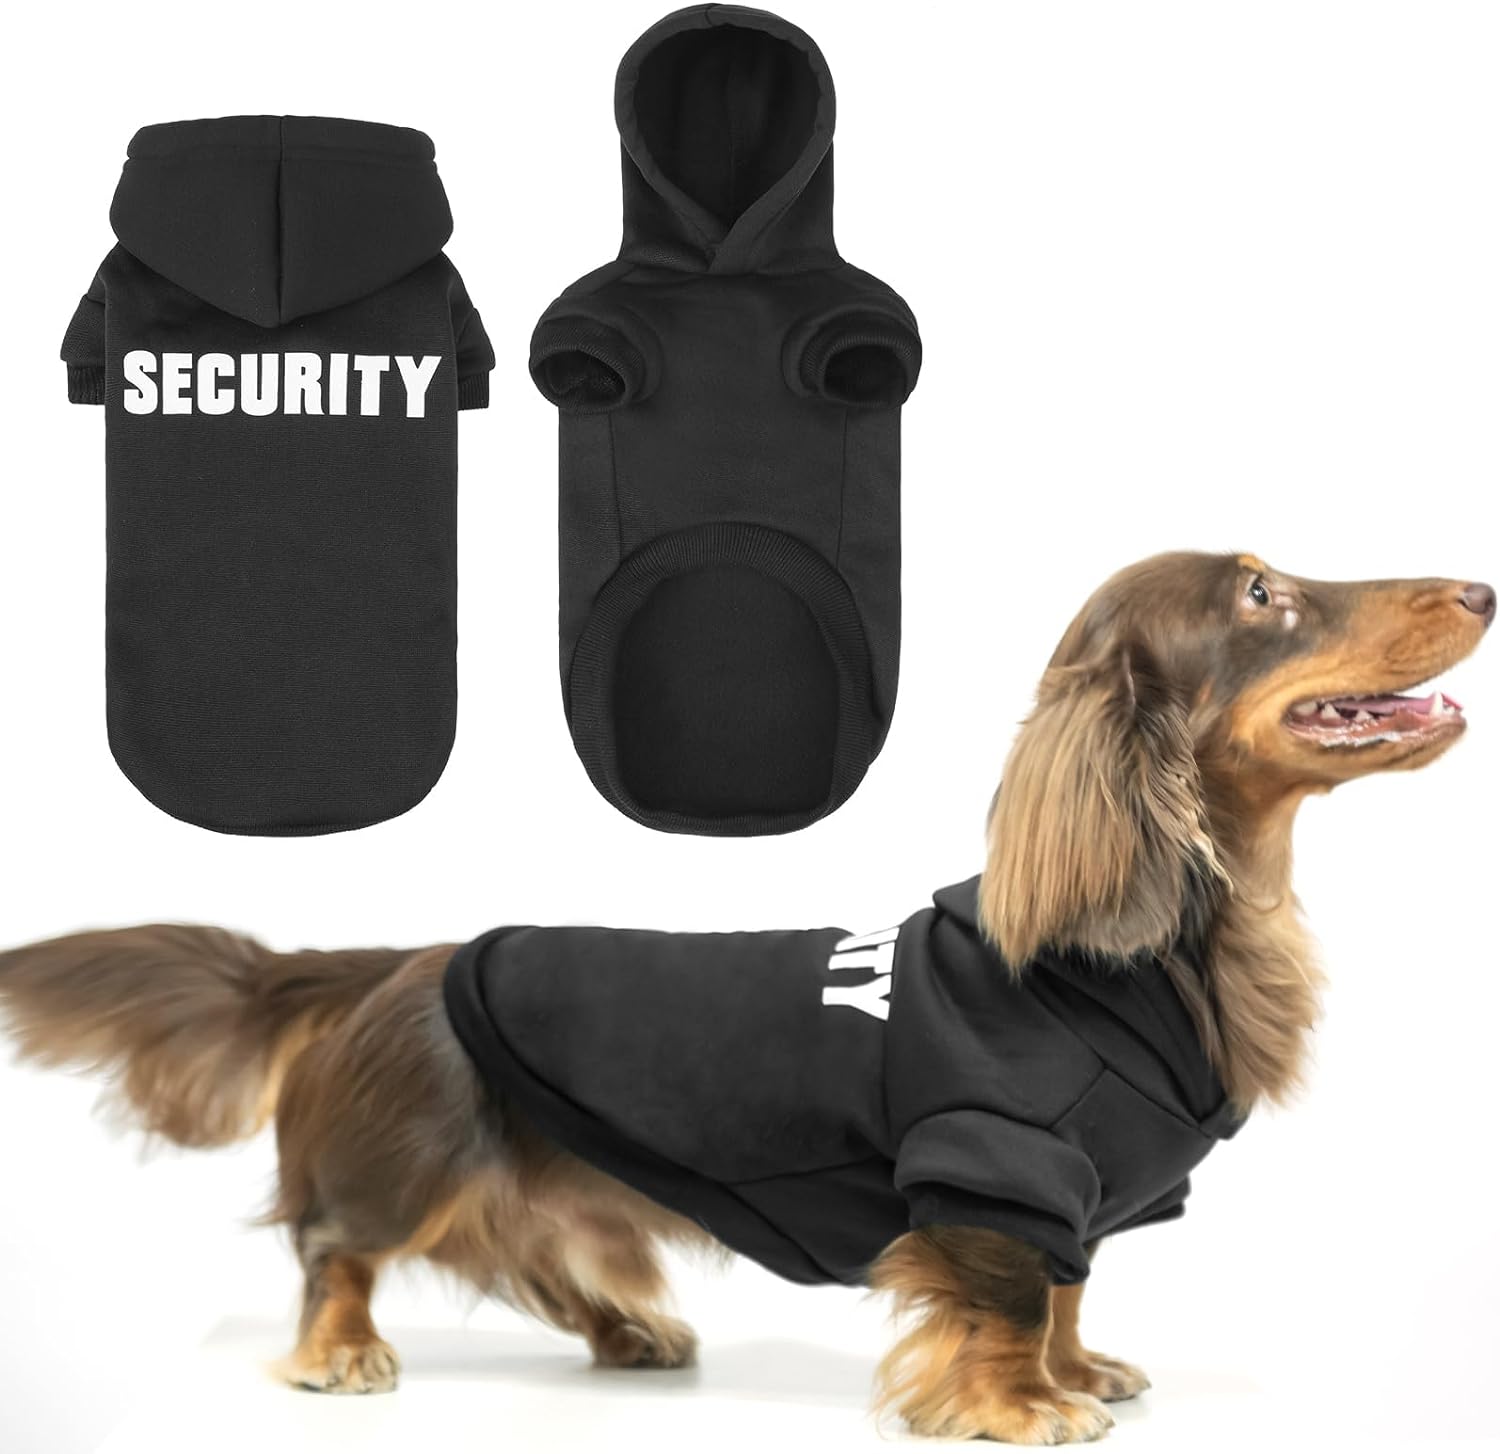 BINGPET Security Dog Hoodies Dachshund Sweater Cold Weather Dog Coats Soft Brushed Fleece Pet Clothes Hooded Sweatshirt for Dog Cat